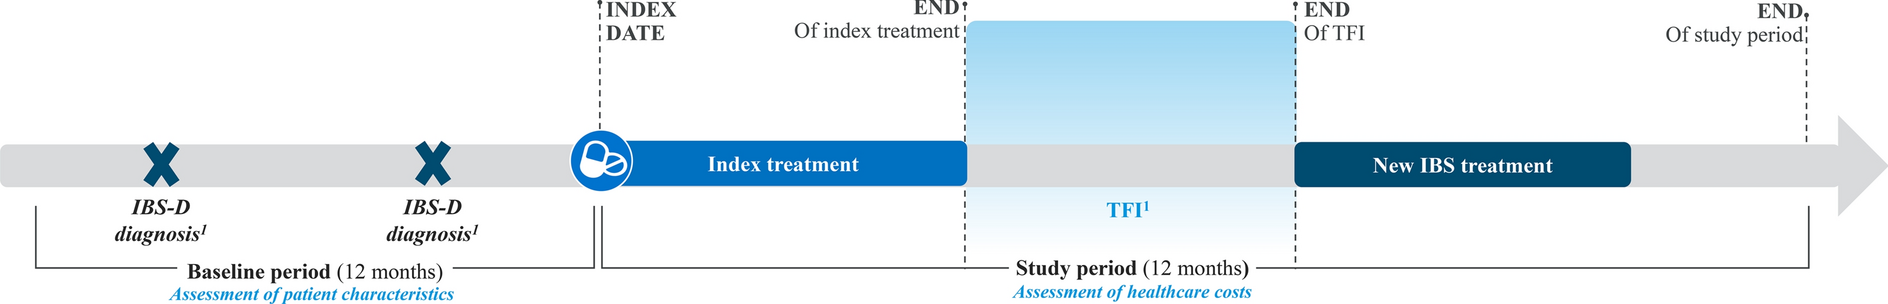 Treatment-Free Interval: A Novel Approach to Assessing Real-World Treatment Effectiveness and Economic Impact Among Patients with Irritable Bowel Syndrome with Diarrhea